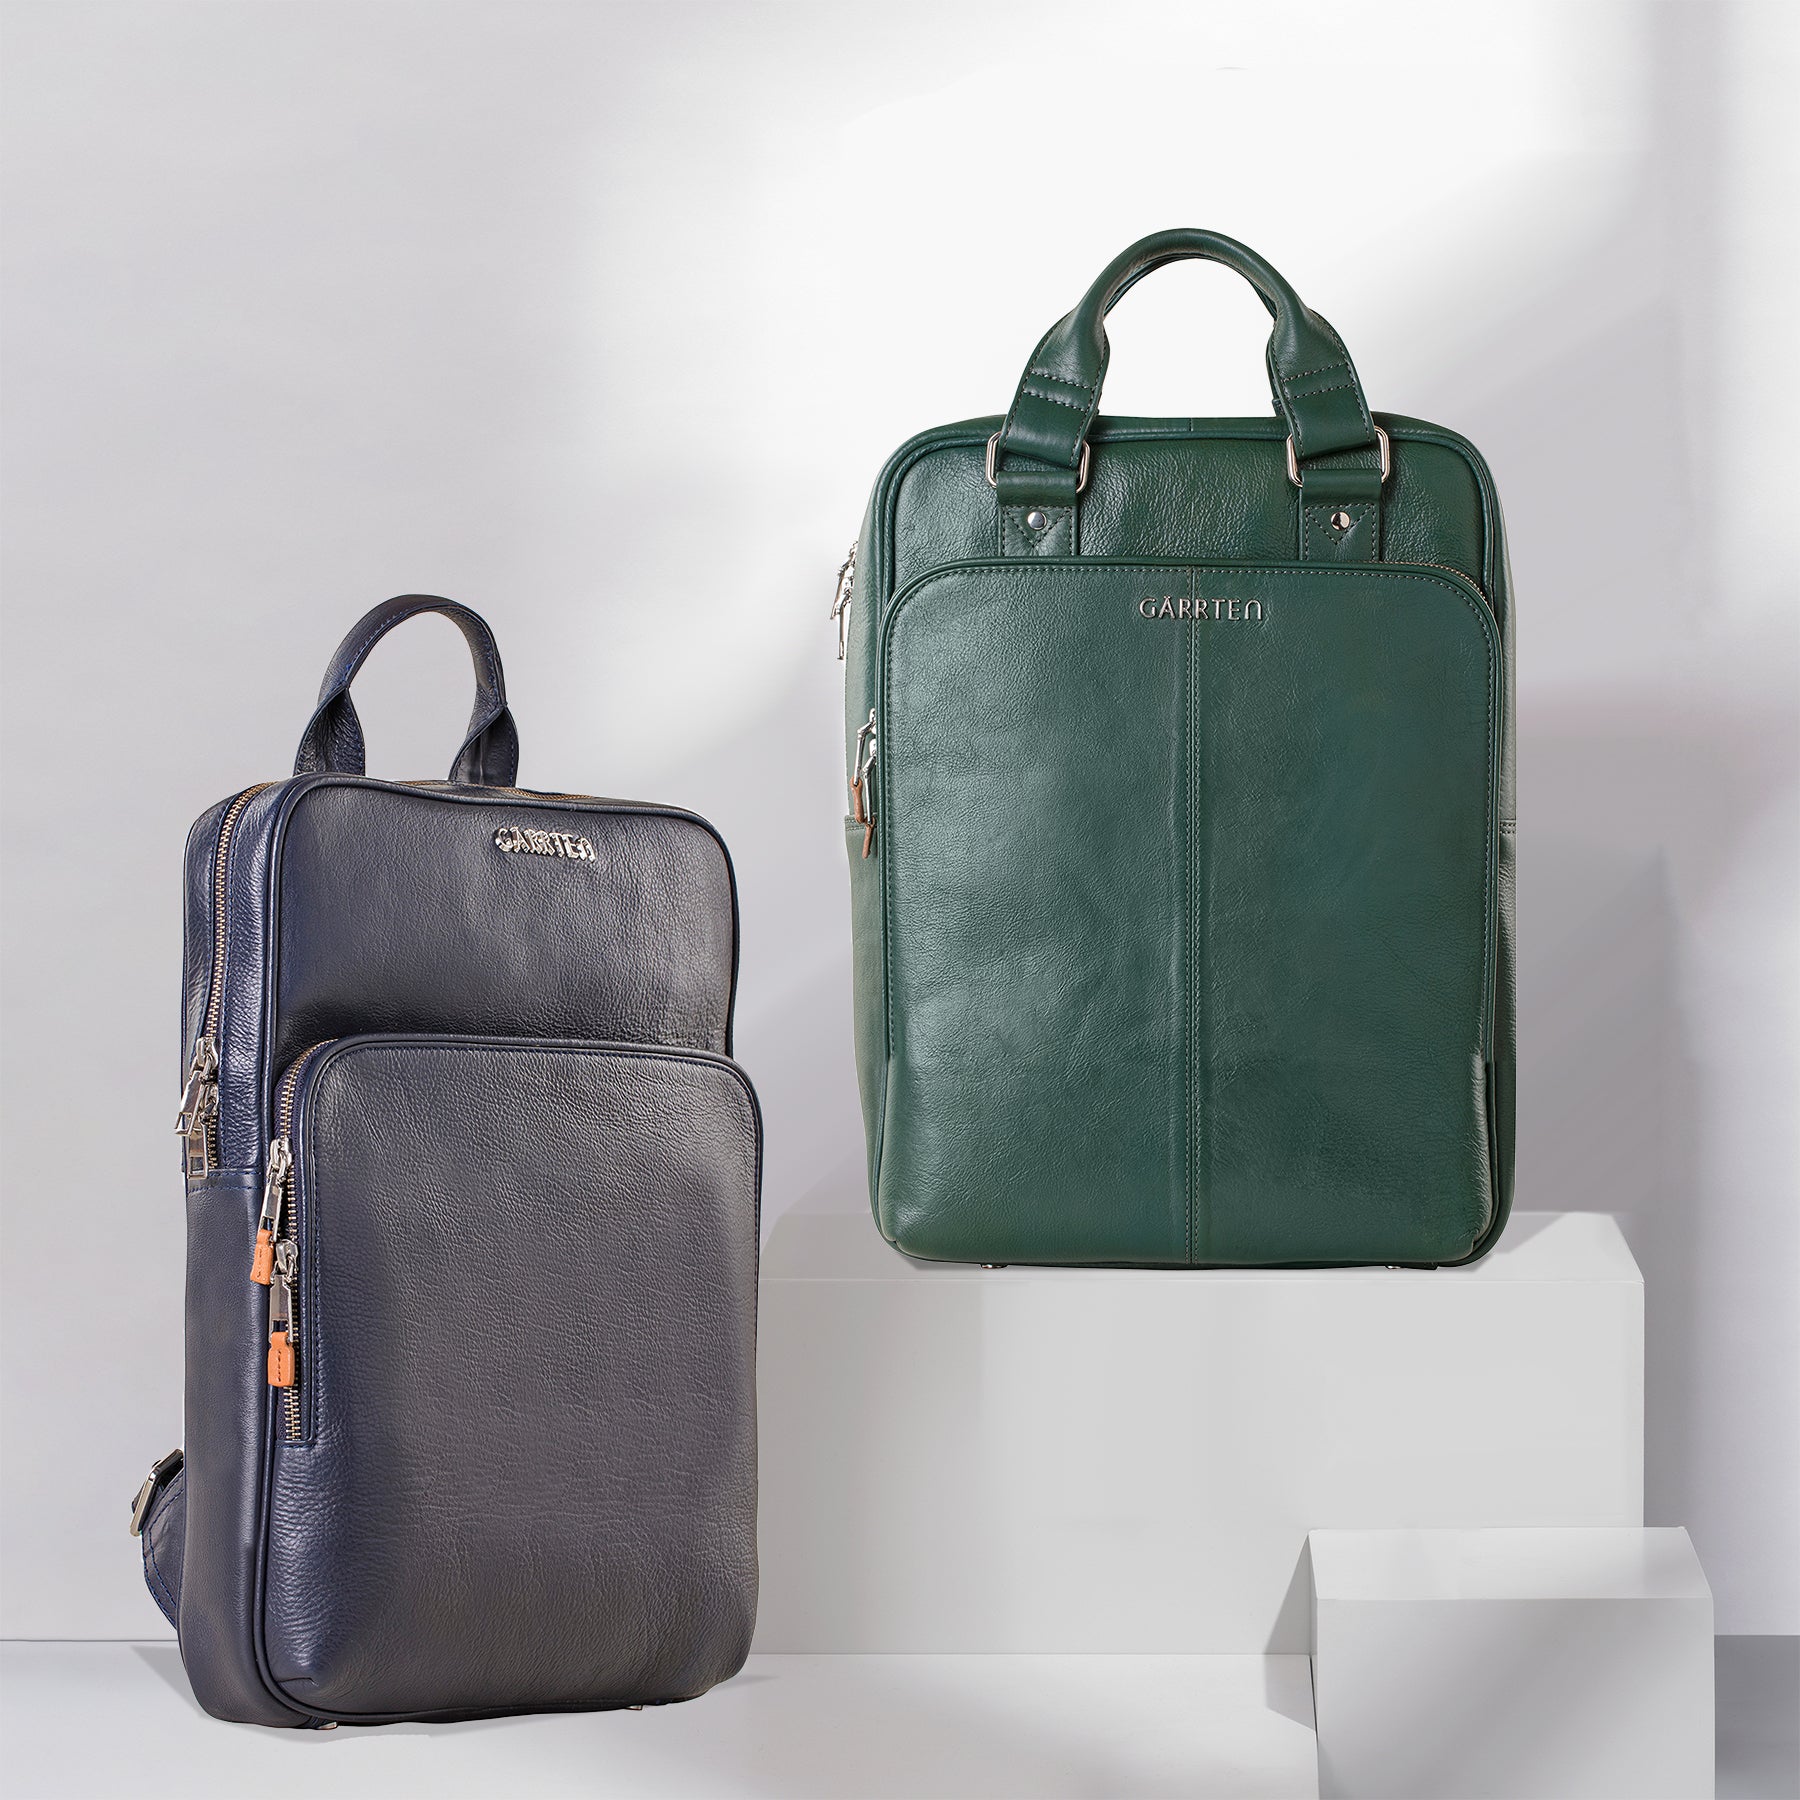 Professional Duo - Leather Backpack set in Racing Green & Midnight